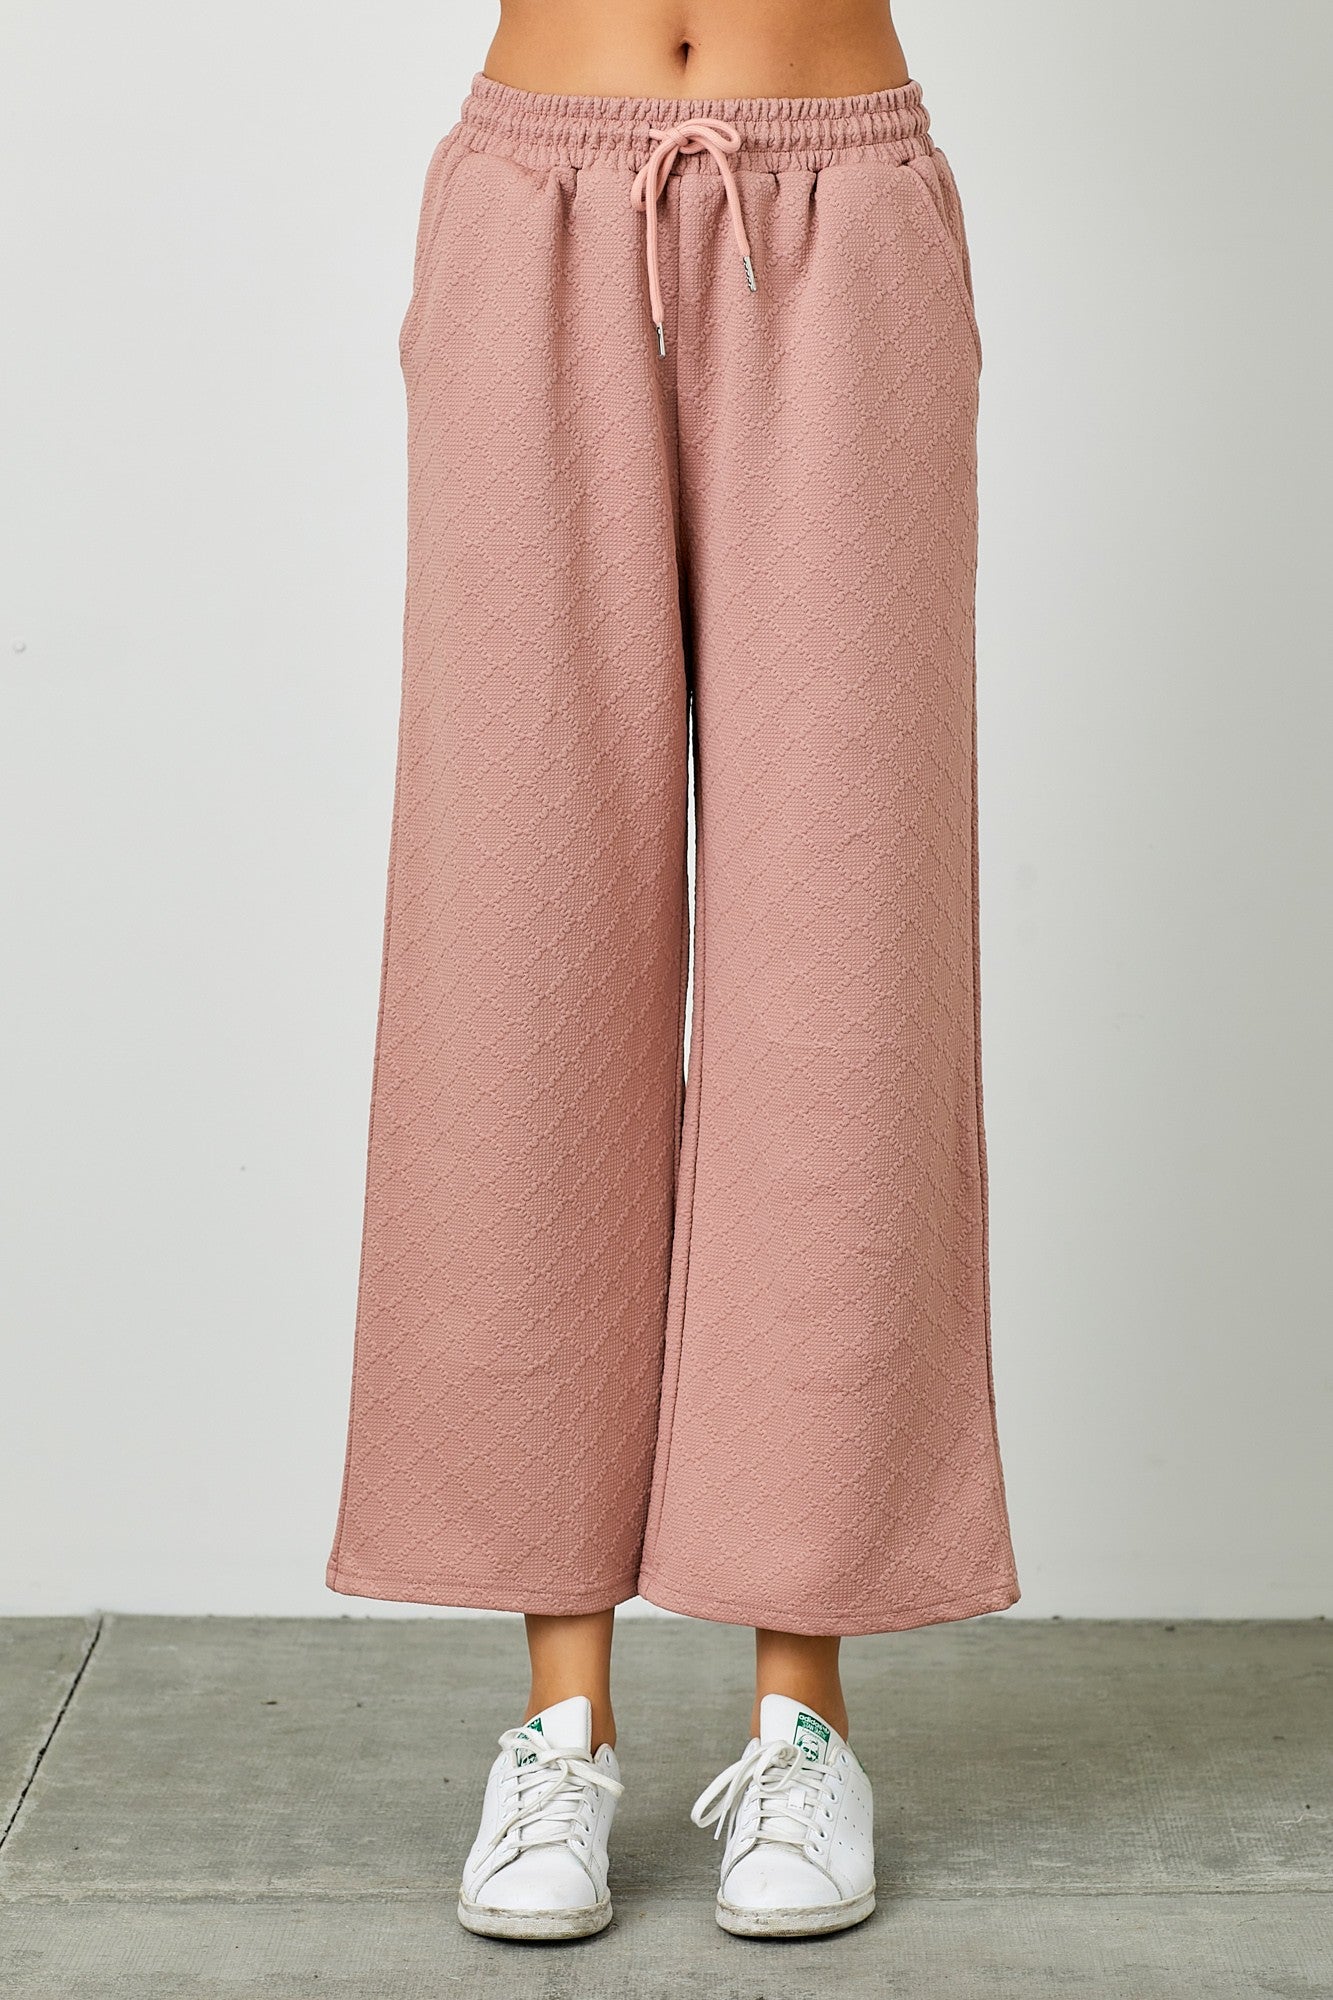 Textured Knit 2 Piece Lounge Set in Dusty Rose